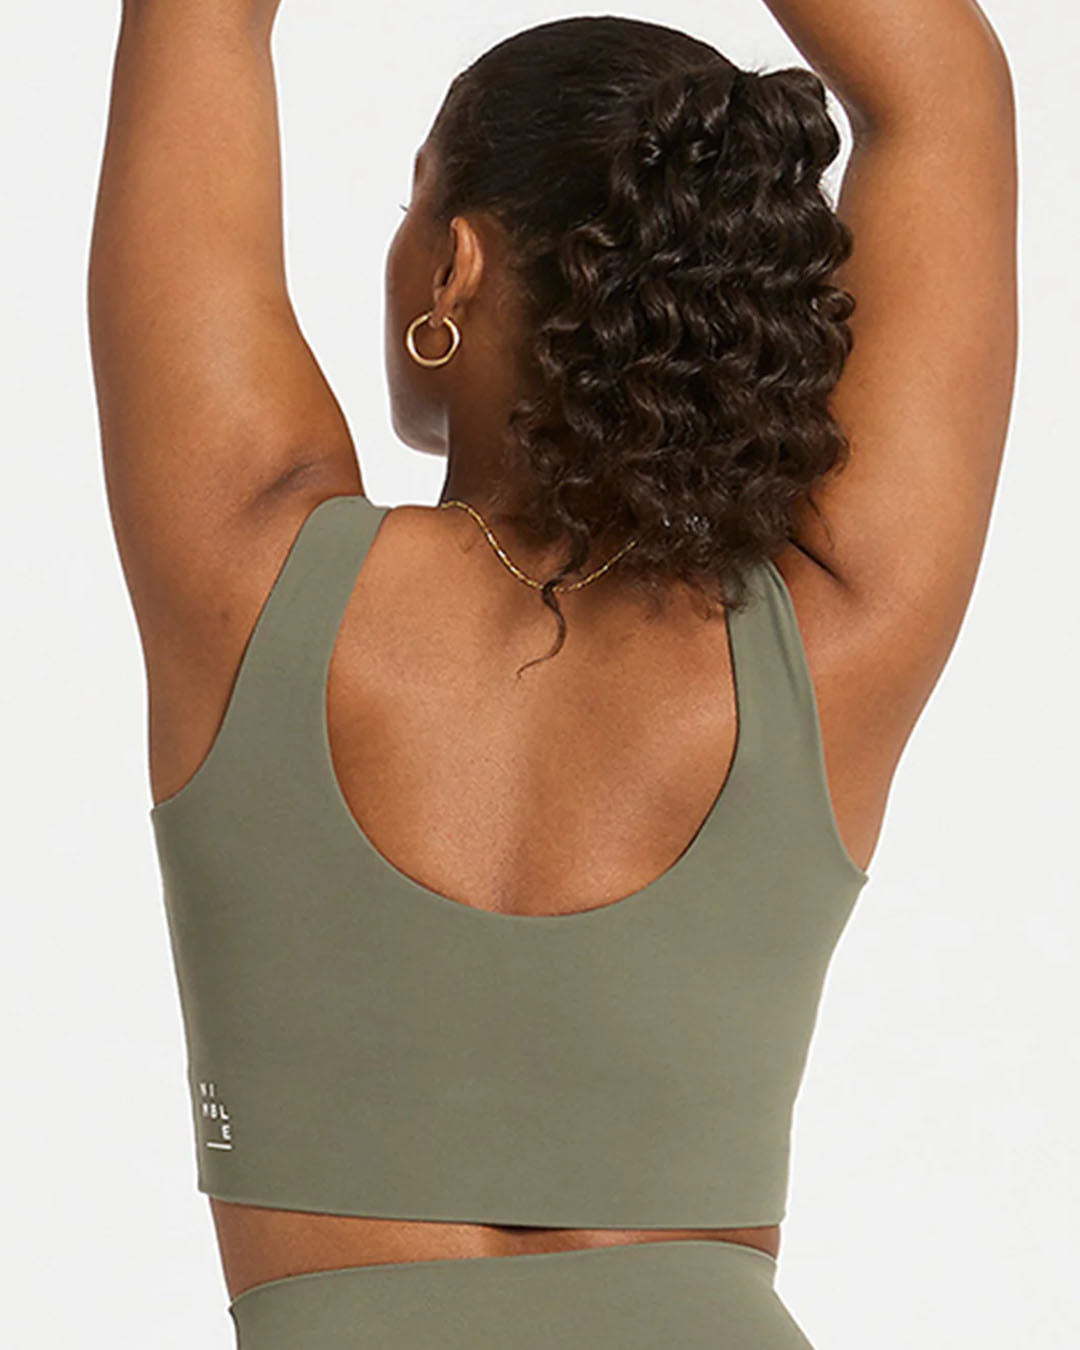 In Motion Scoop Bra - Dusty Olive Sports Bras &amp; Crops by Nimble - Prae Store